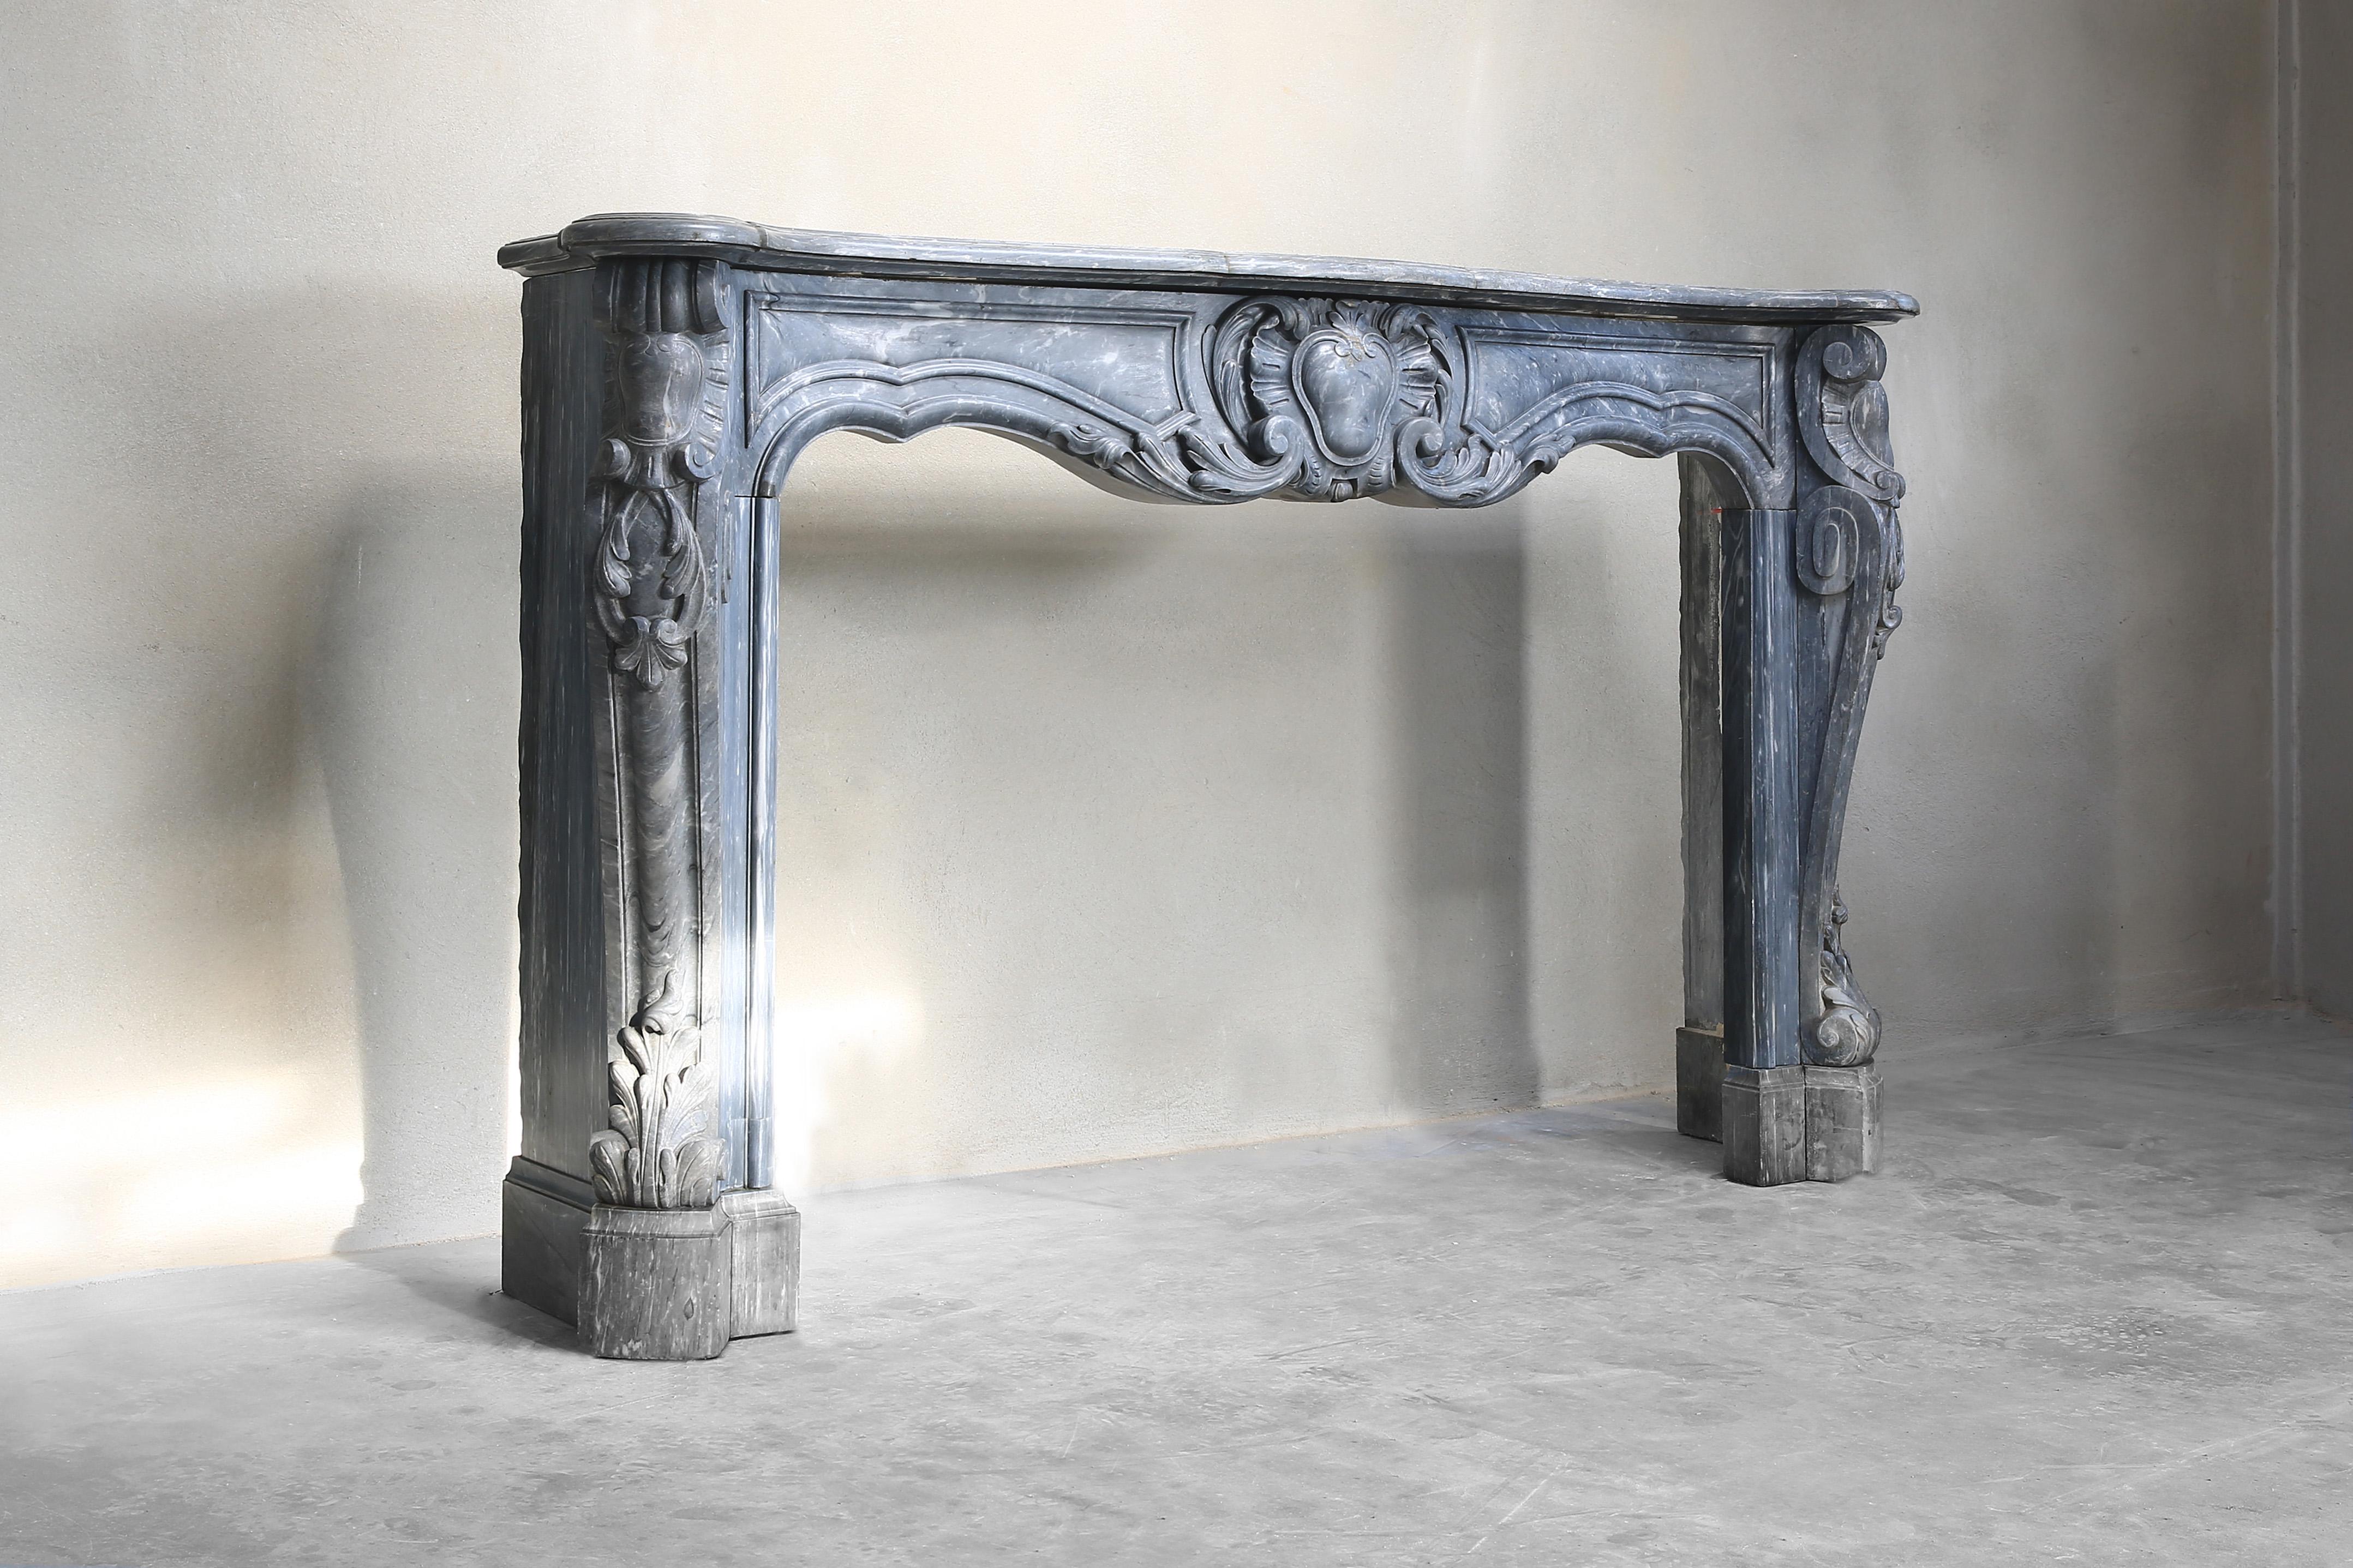 This is a jewel within our collection of antique marble fireplaces! A unique chimney in the style of Louis XV from the 18th century. This beautiful fireplace has beautiful round shapes and ornaments. Look at the beautiful elements in the front